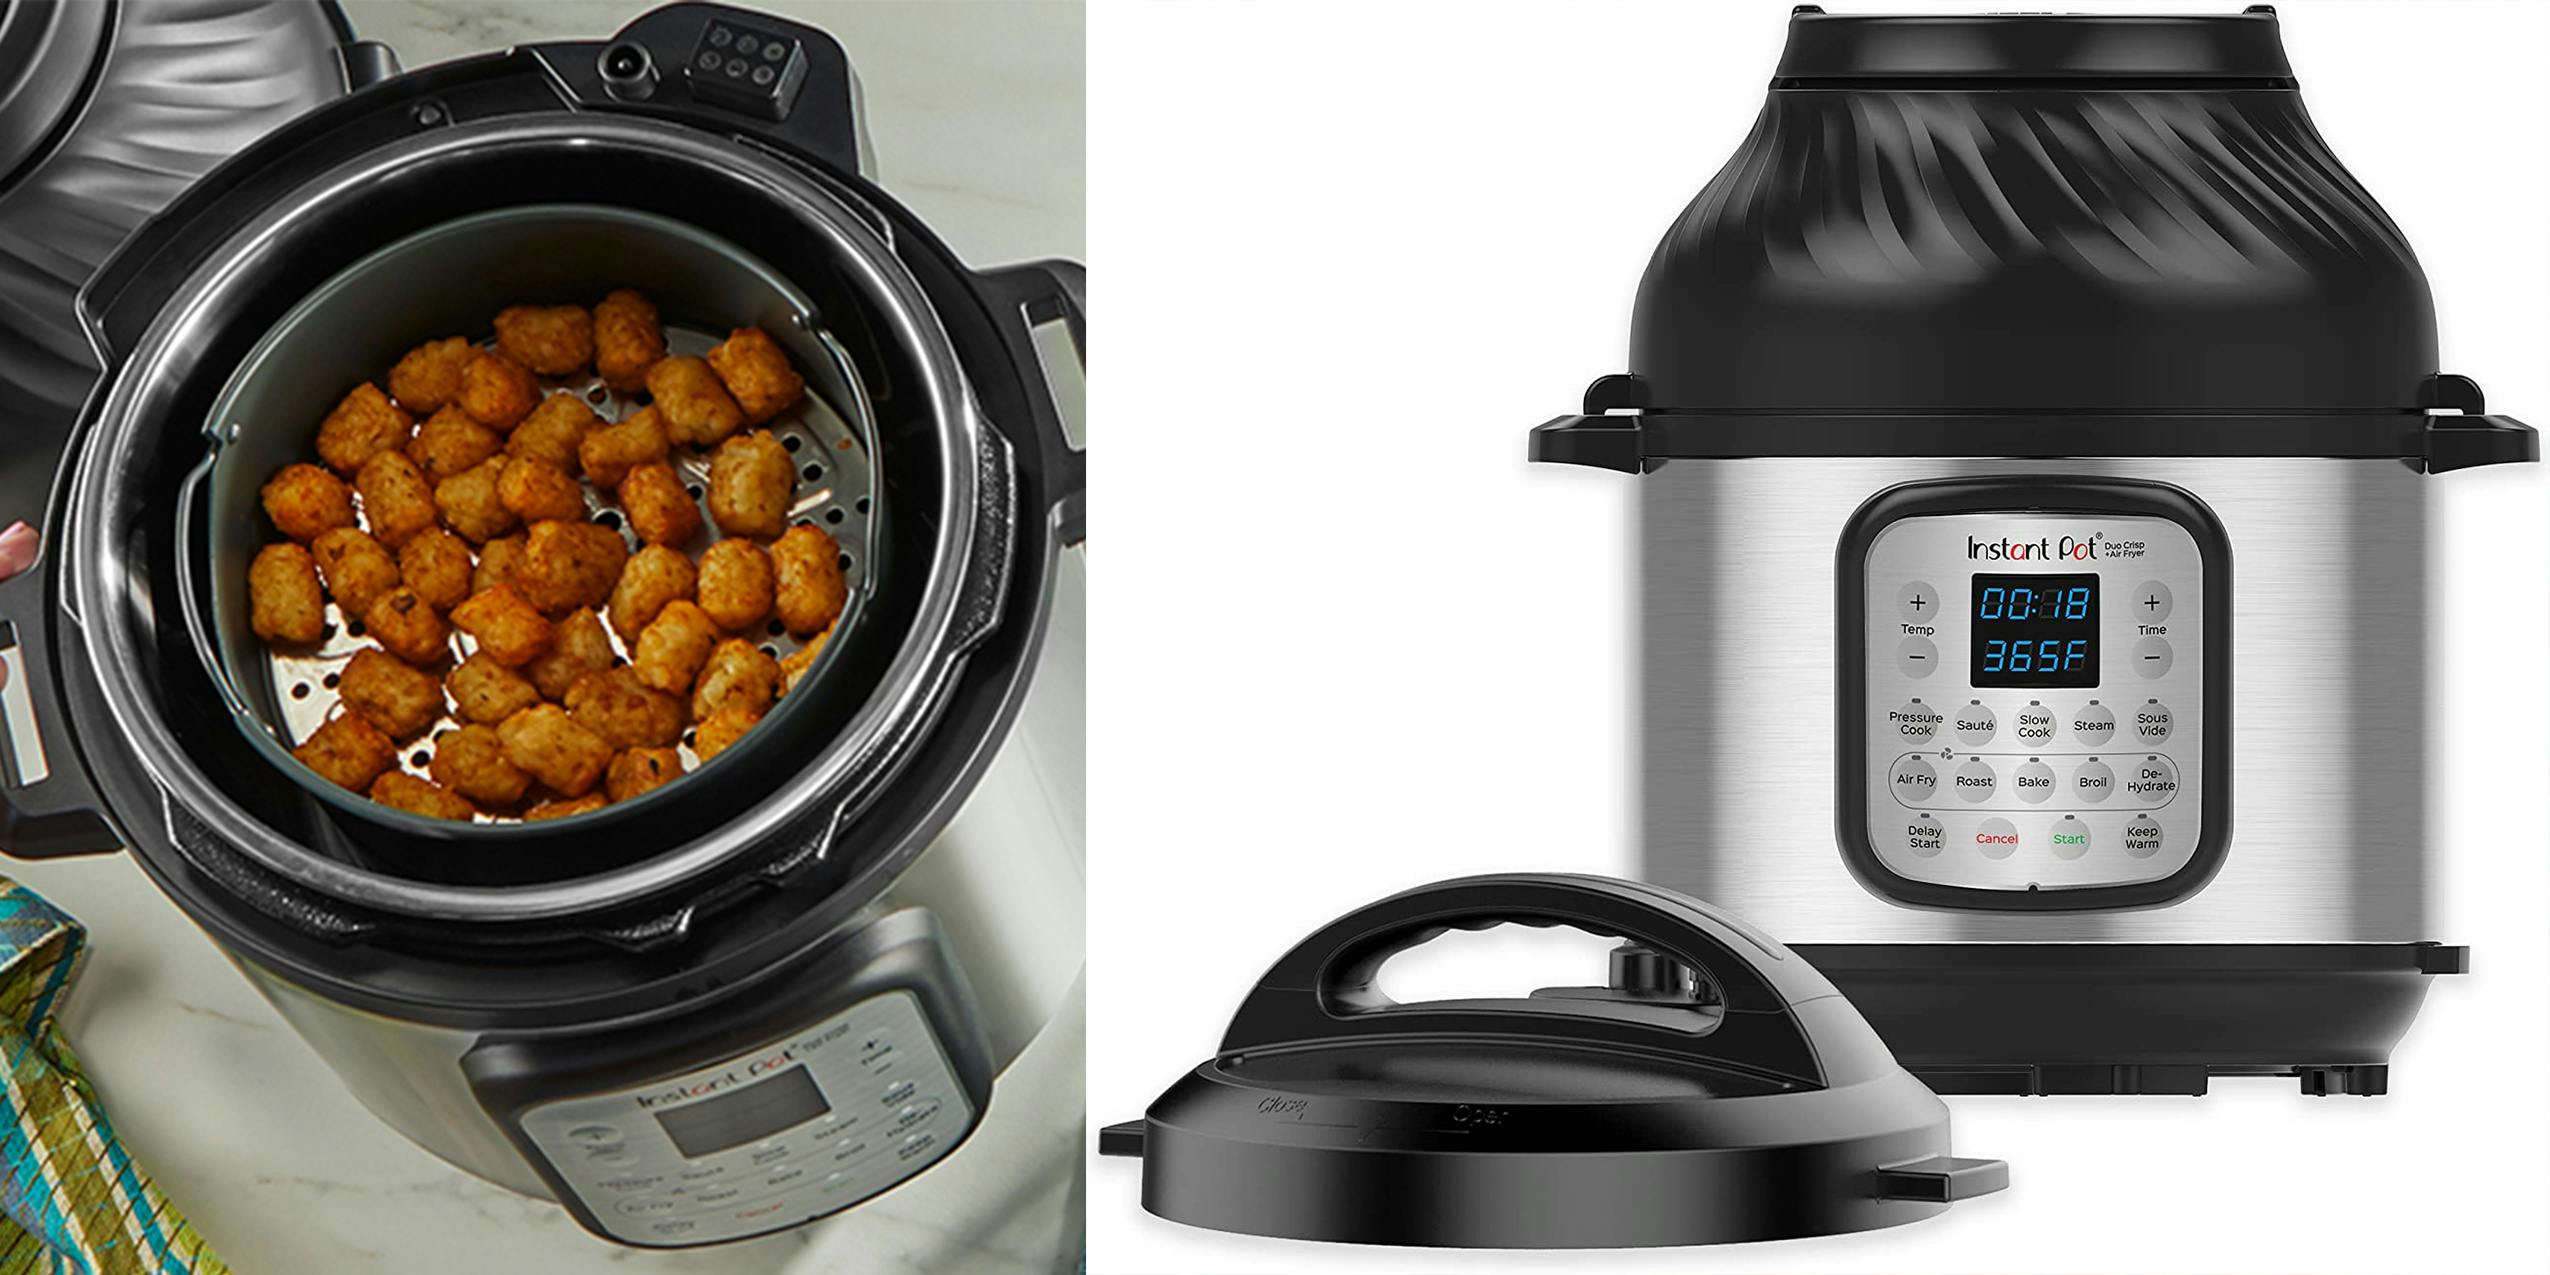 An Instant Pot Duo Crisp filled with tater tots as well as how the product looks like.